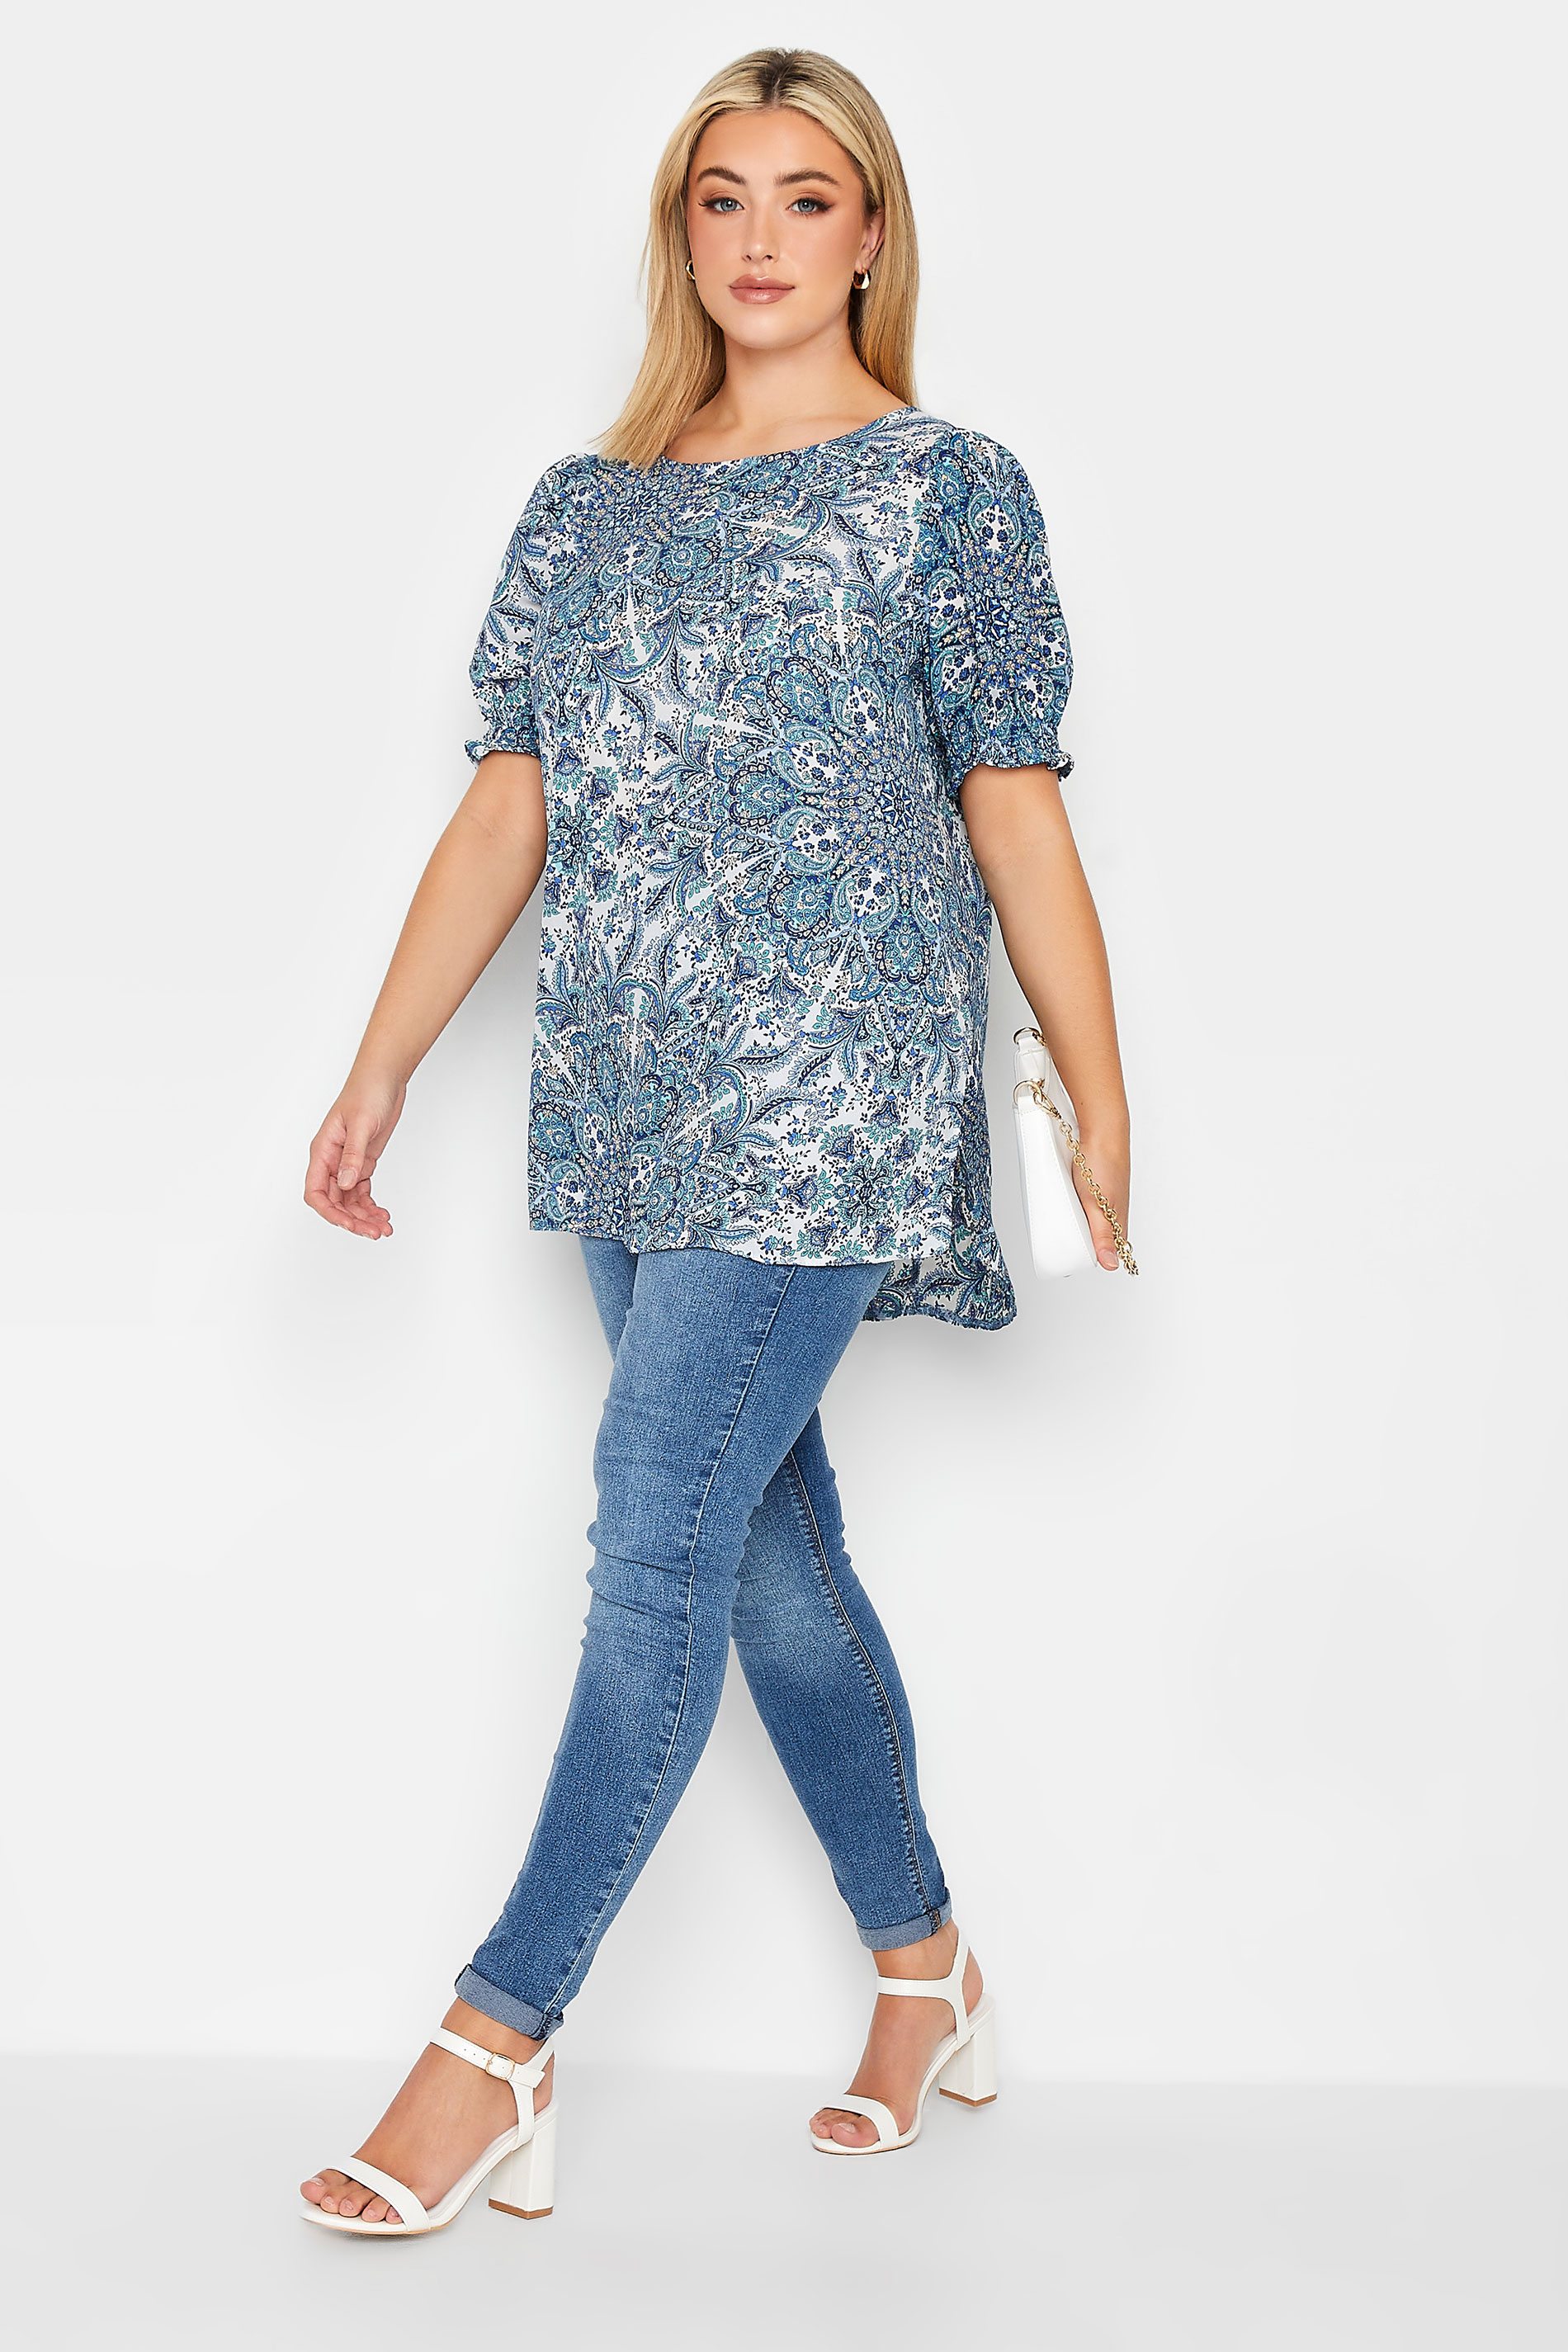 YOURS Curve Plus Size Blue Paisley Print Short Sleeve Blouse | Yours Clothing  2